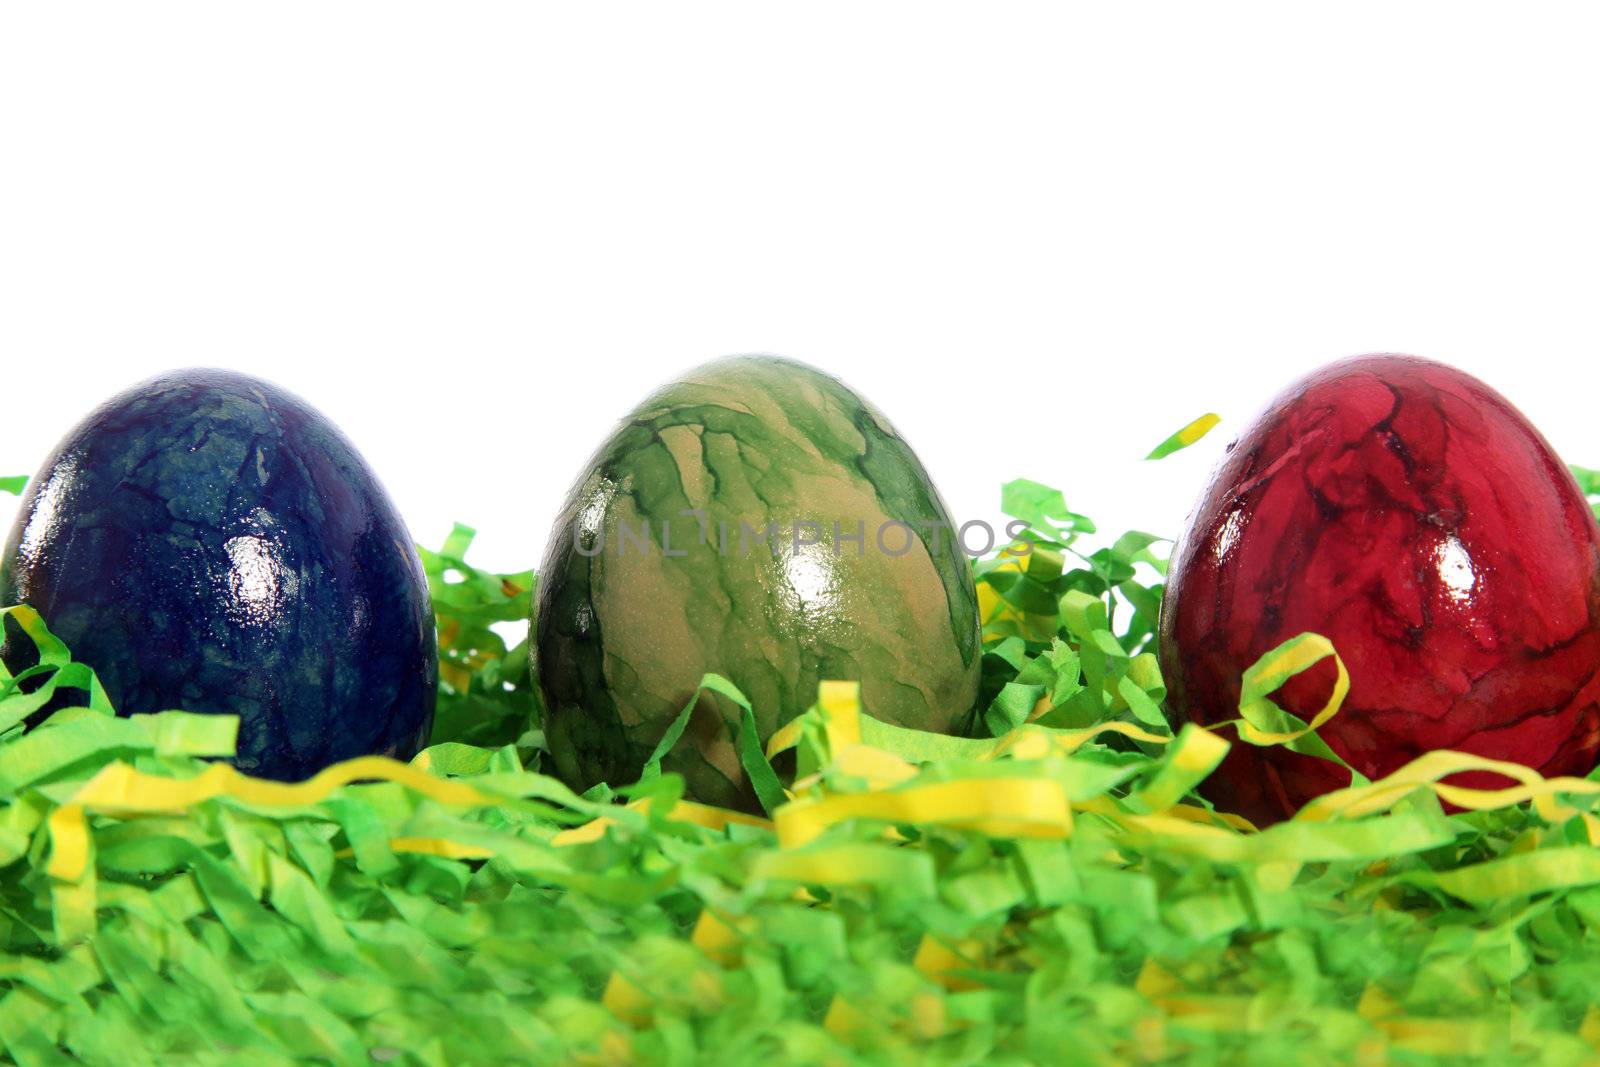 Three marble patterned Easter Eggs in blue, green and red nestled in a bed of green artificial straw against a white background